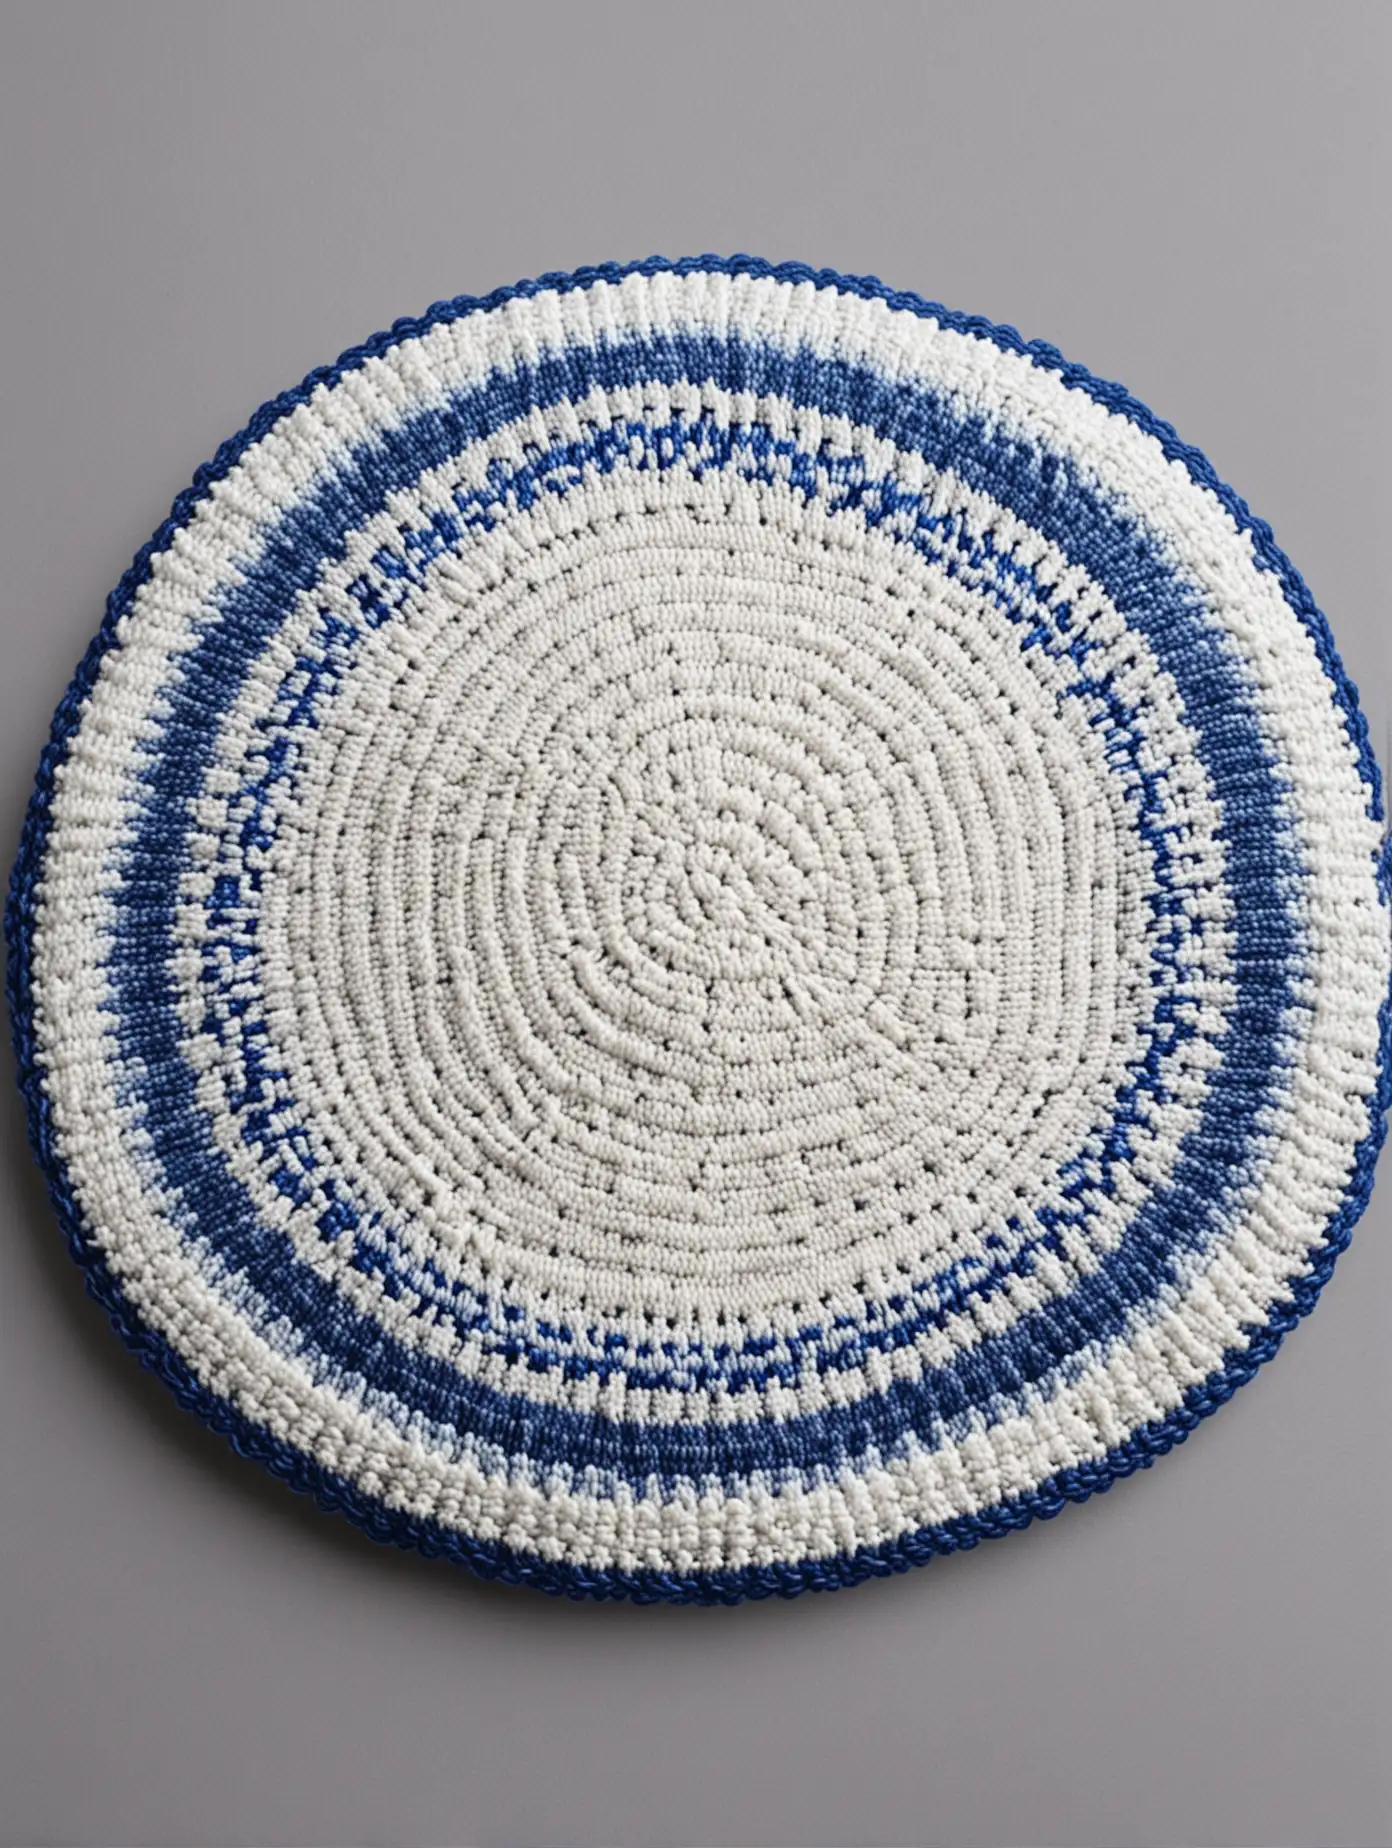 Israeli round knitted Kippah in blue and white colors